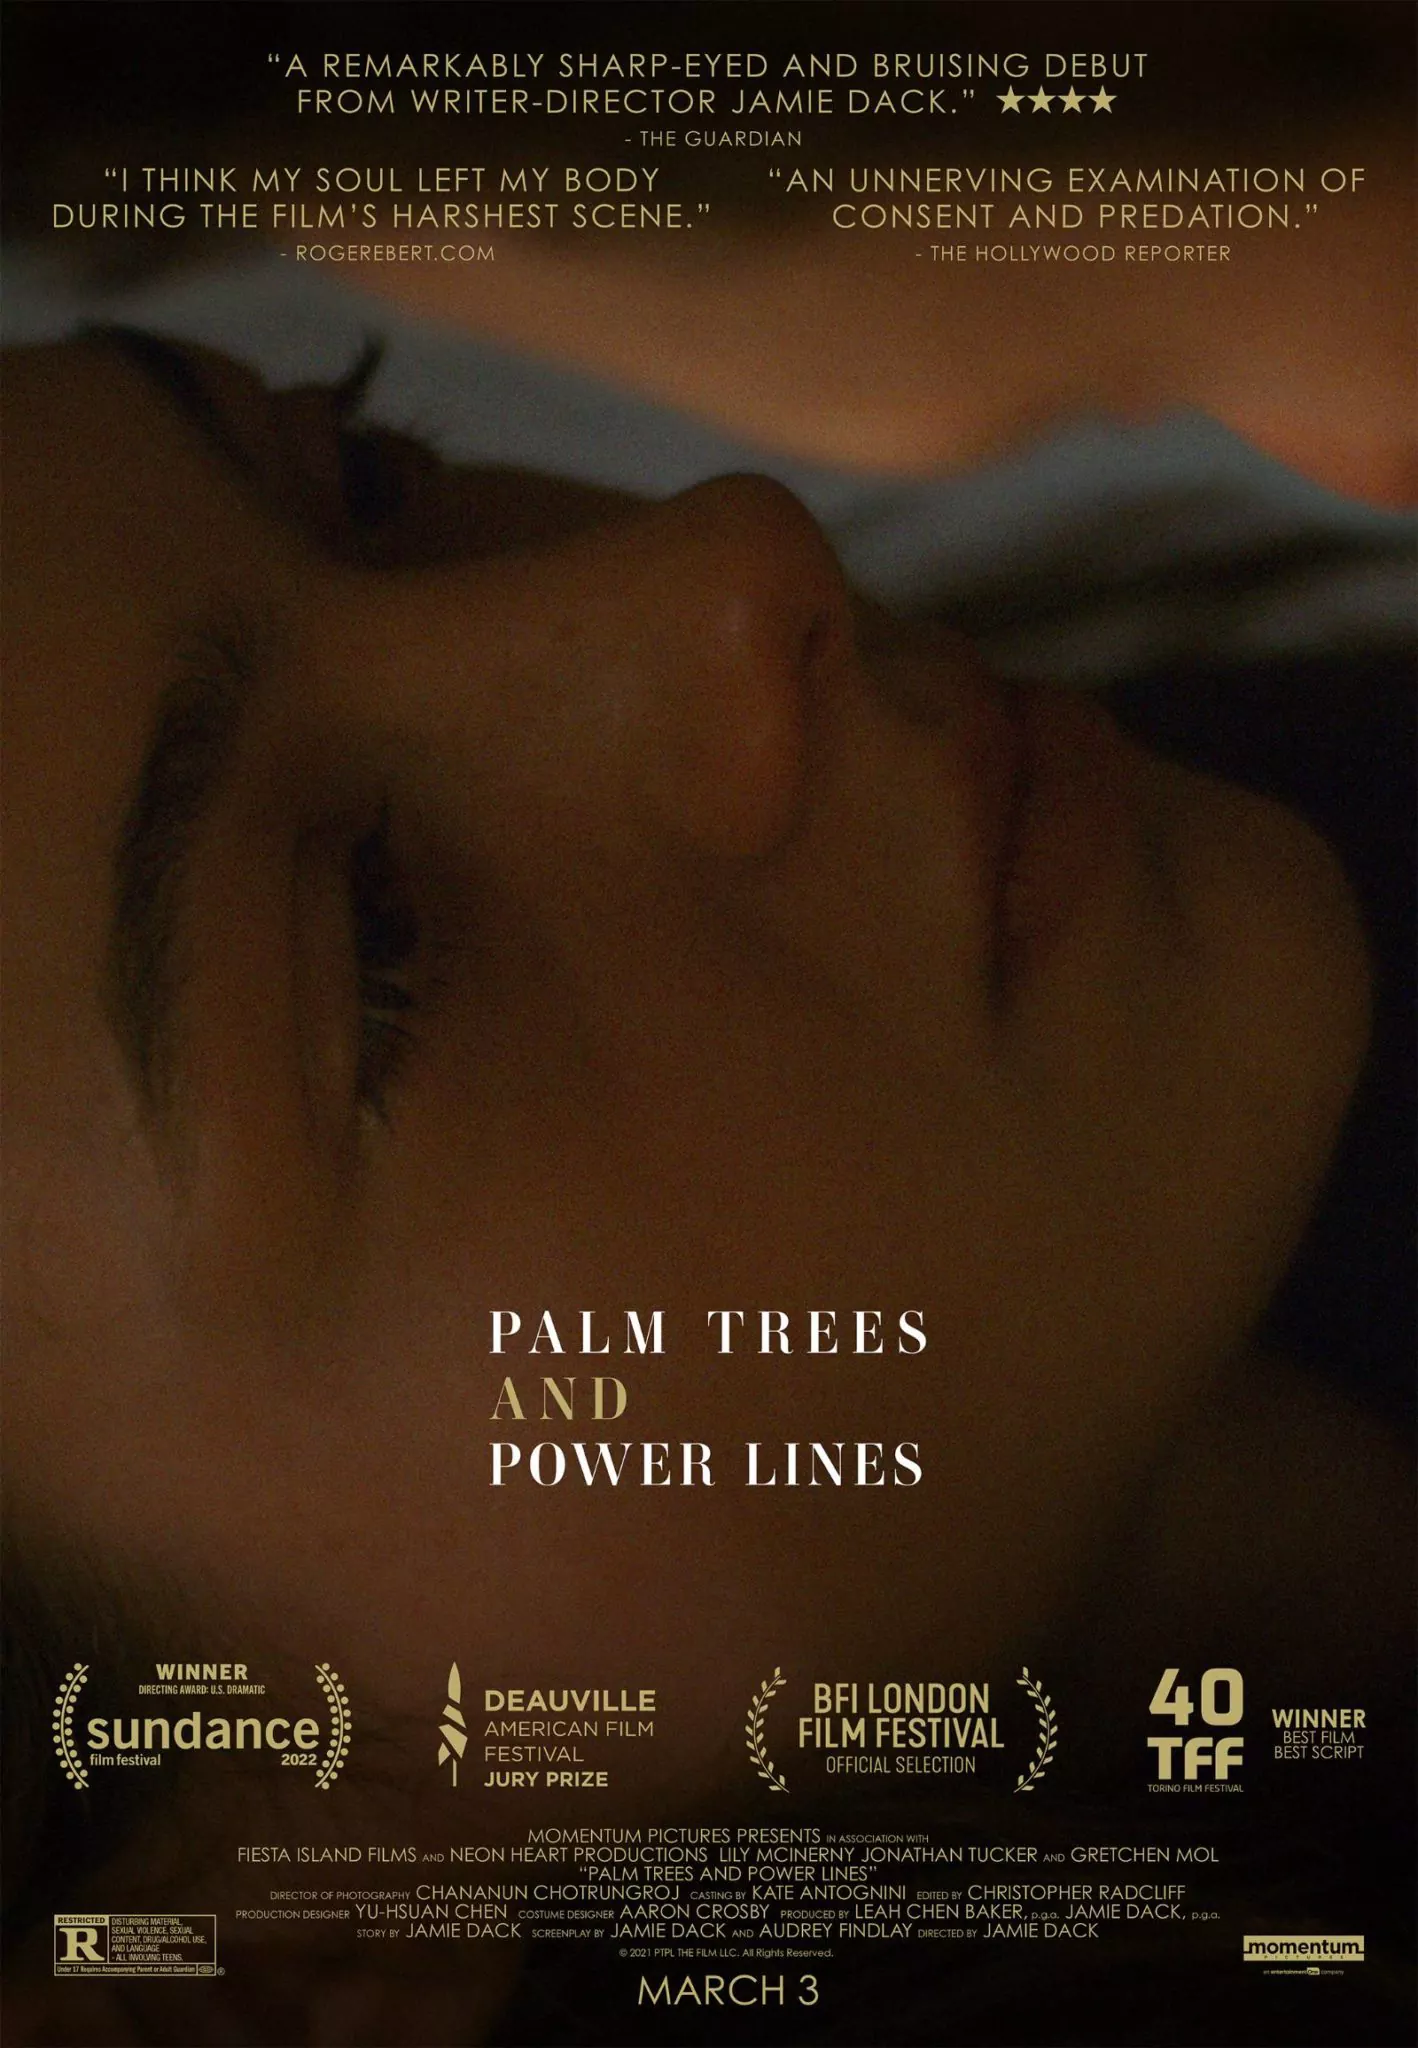 Trailer Από Το "Palm Trees and Power Lines"